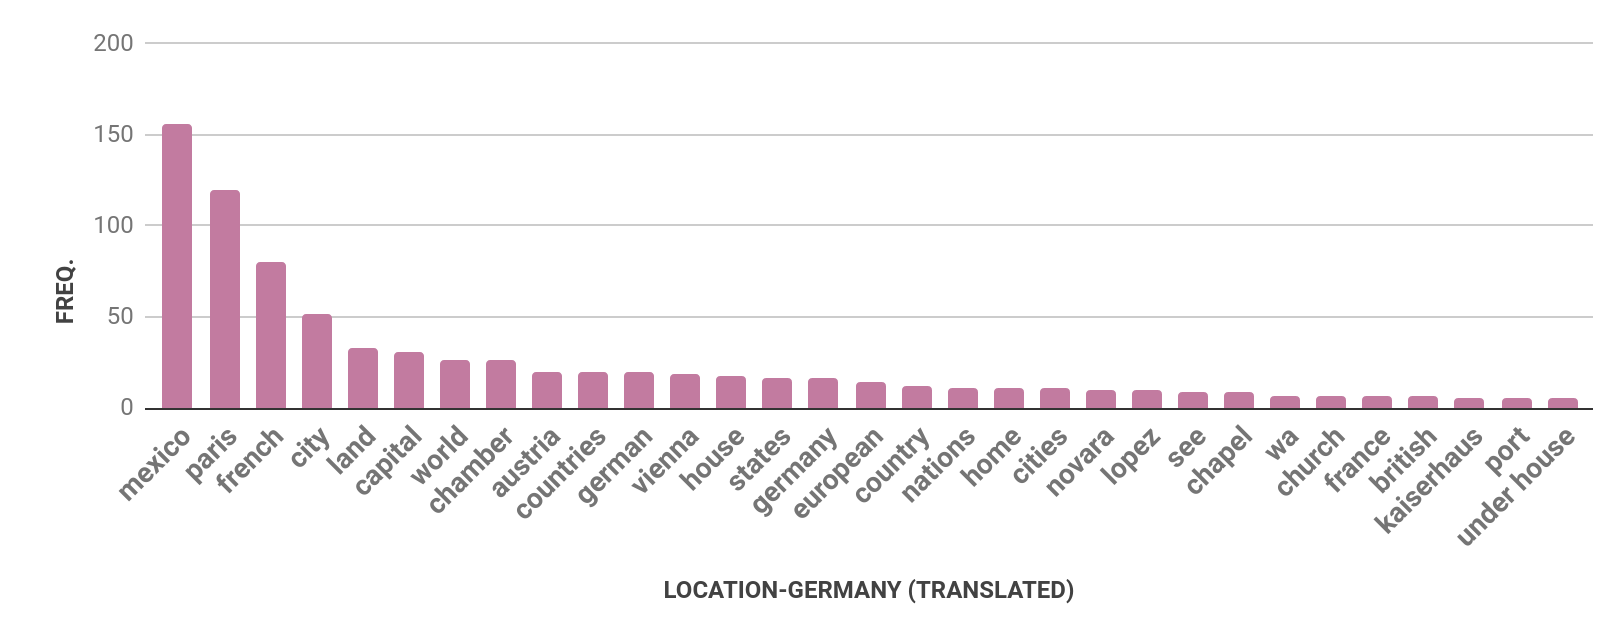 Four bar charts with bars in mauve. The first chart is for Austria, the second is Germany, the third is Mexico, and the fourth is USA